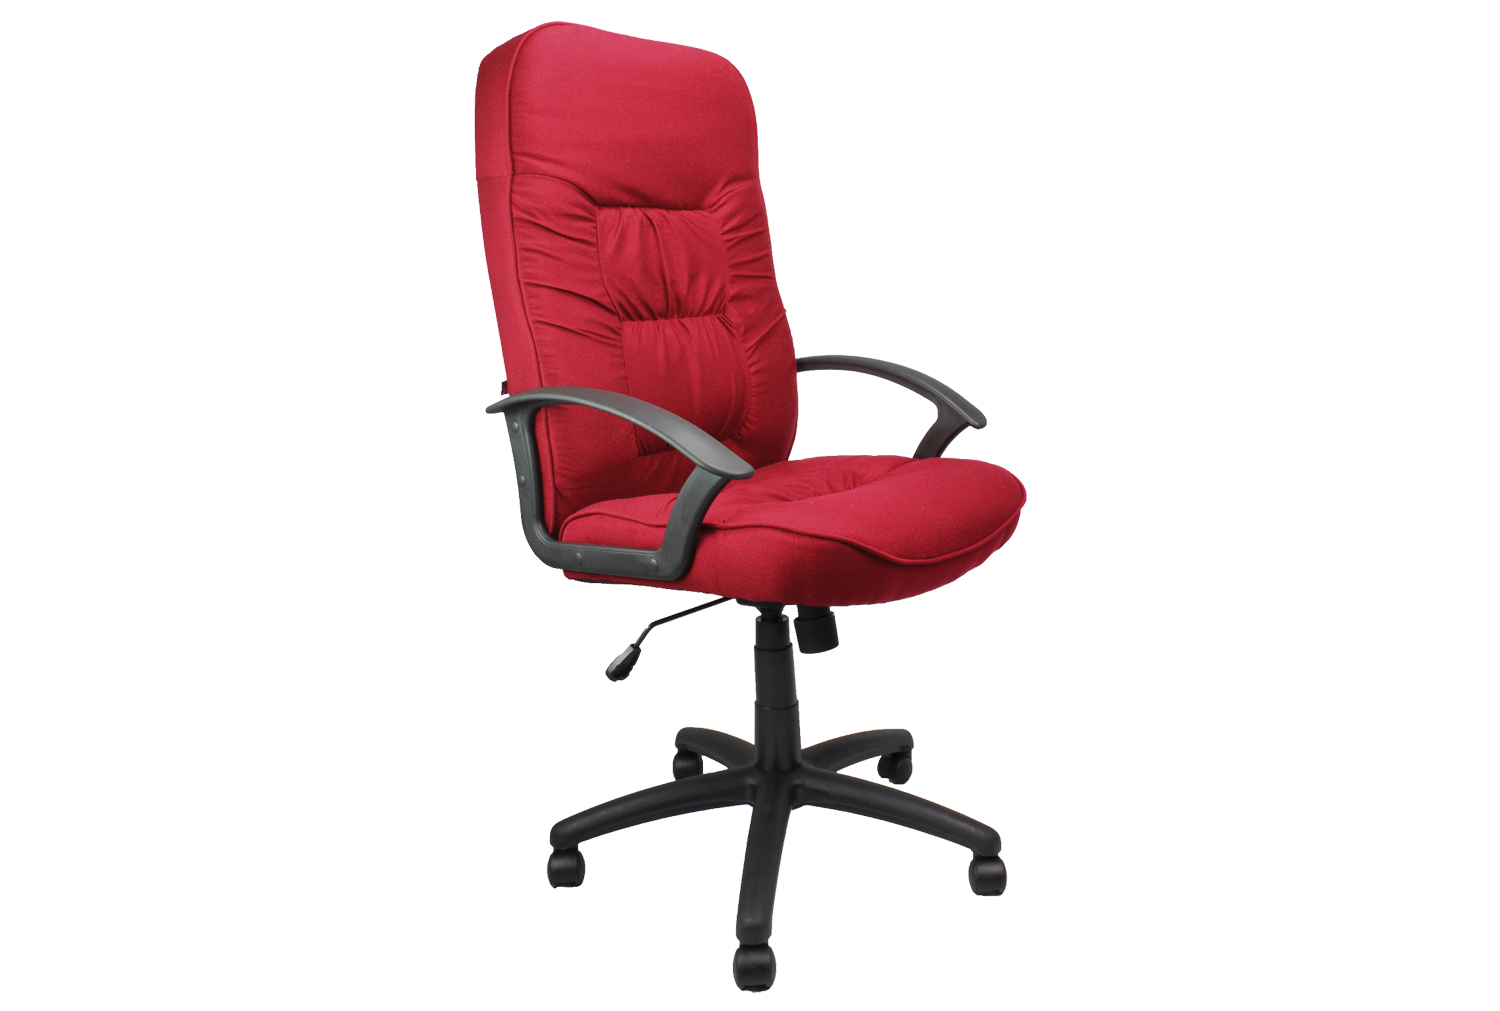 Nero High Back Fabric Executive Office Chair (Burgundy), Fully Installed